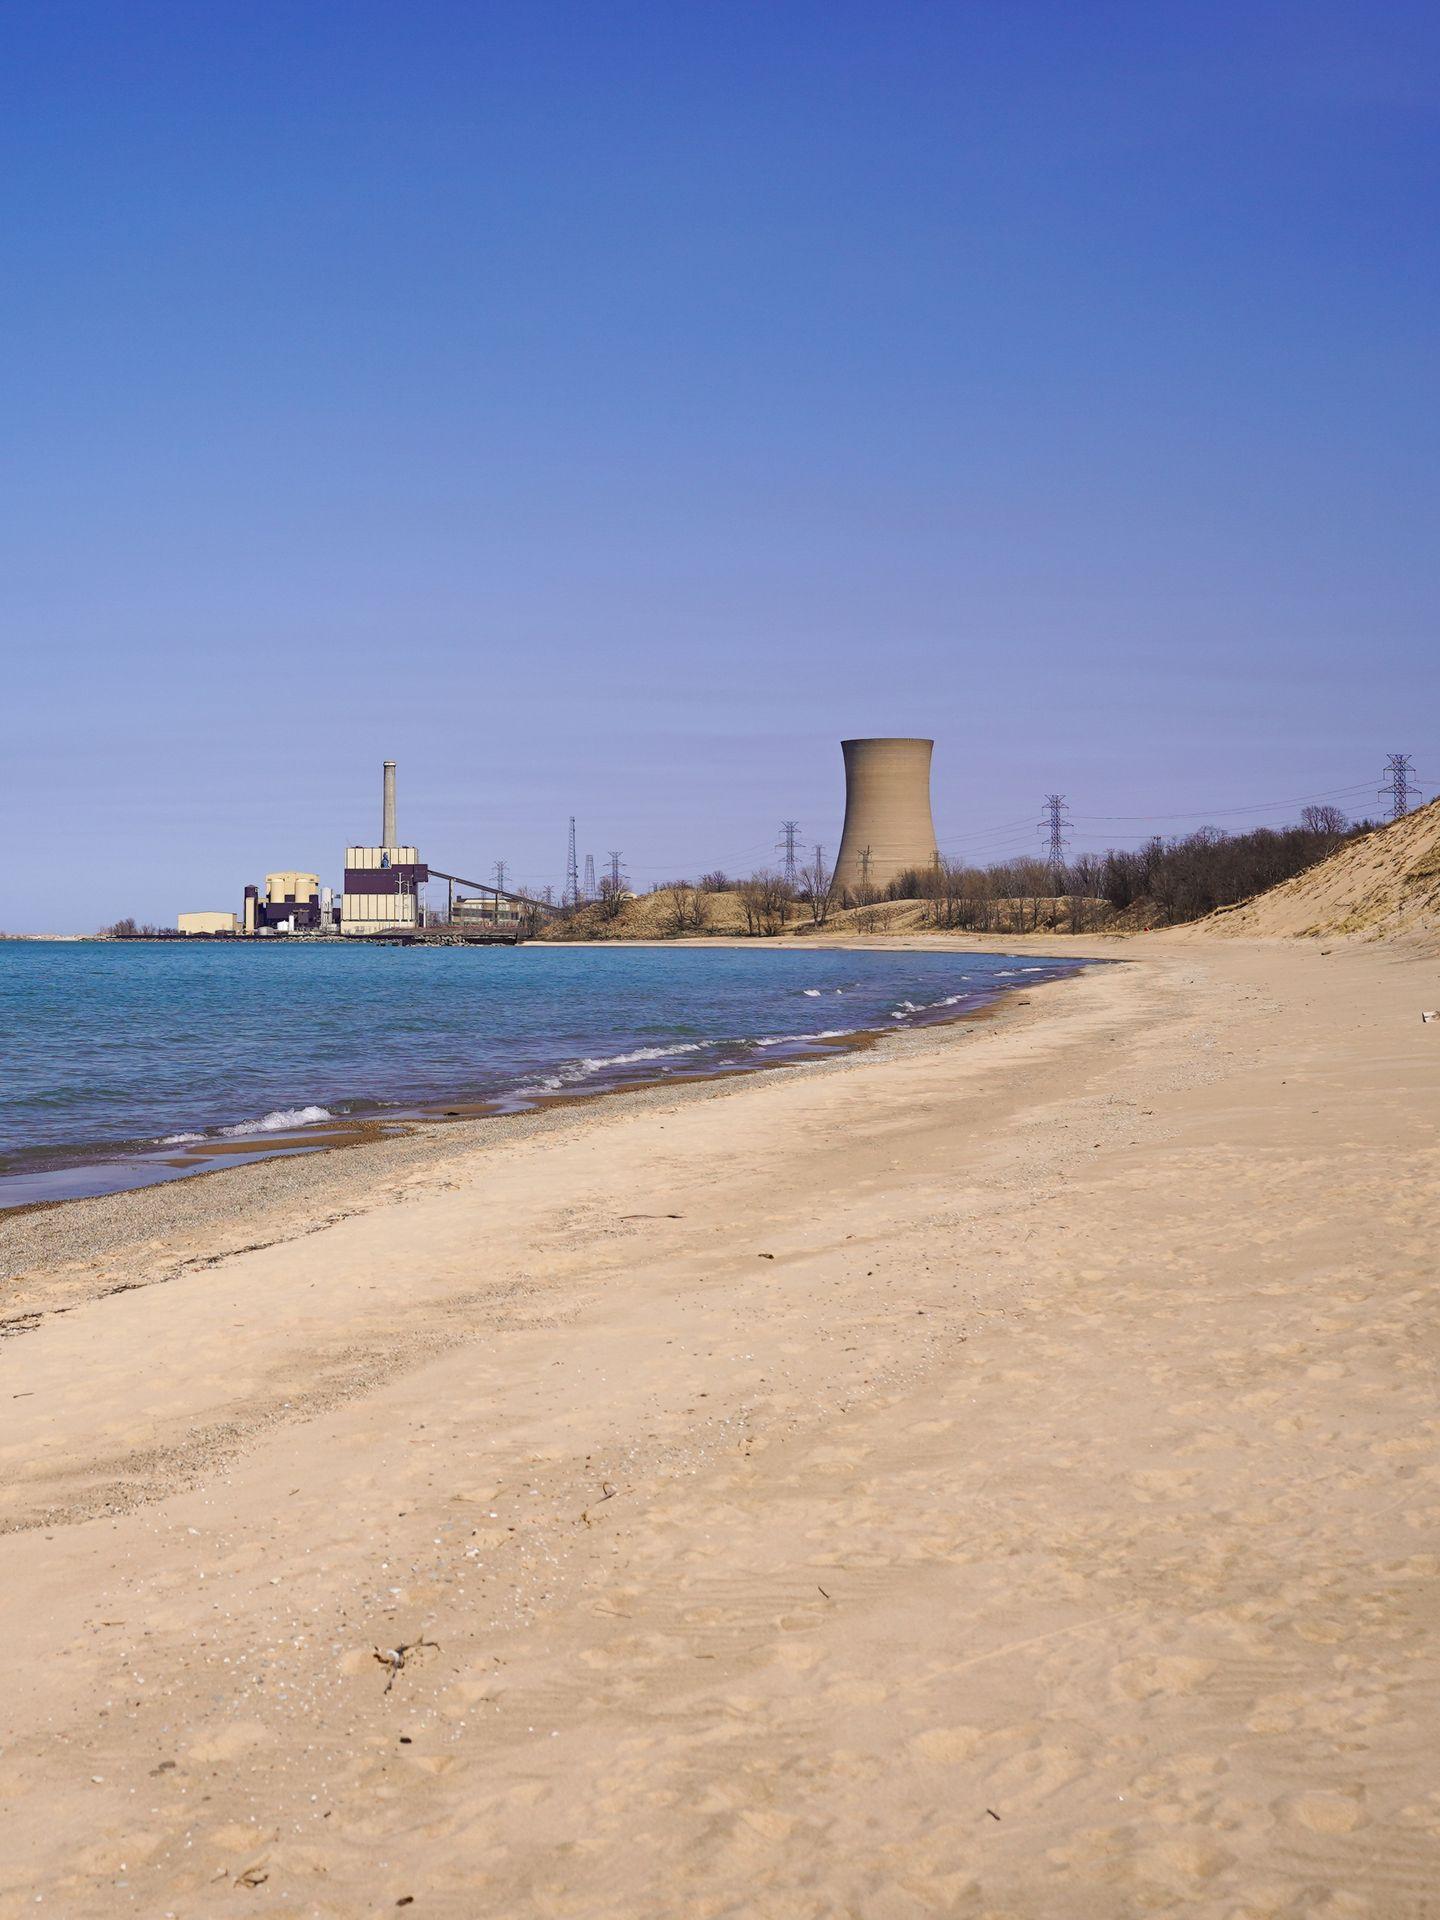 A beach with a view of a former factory.